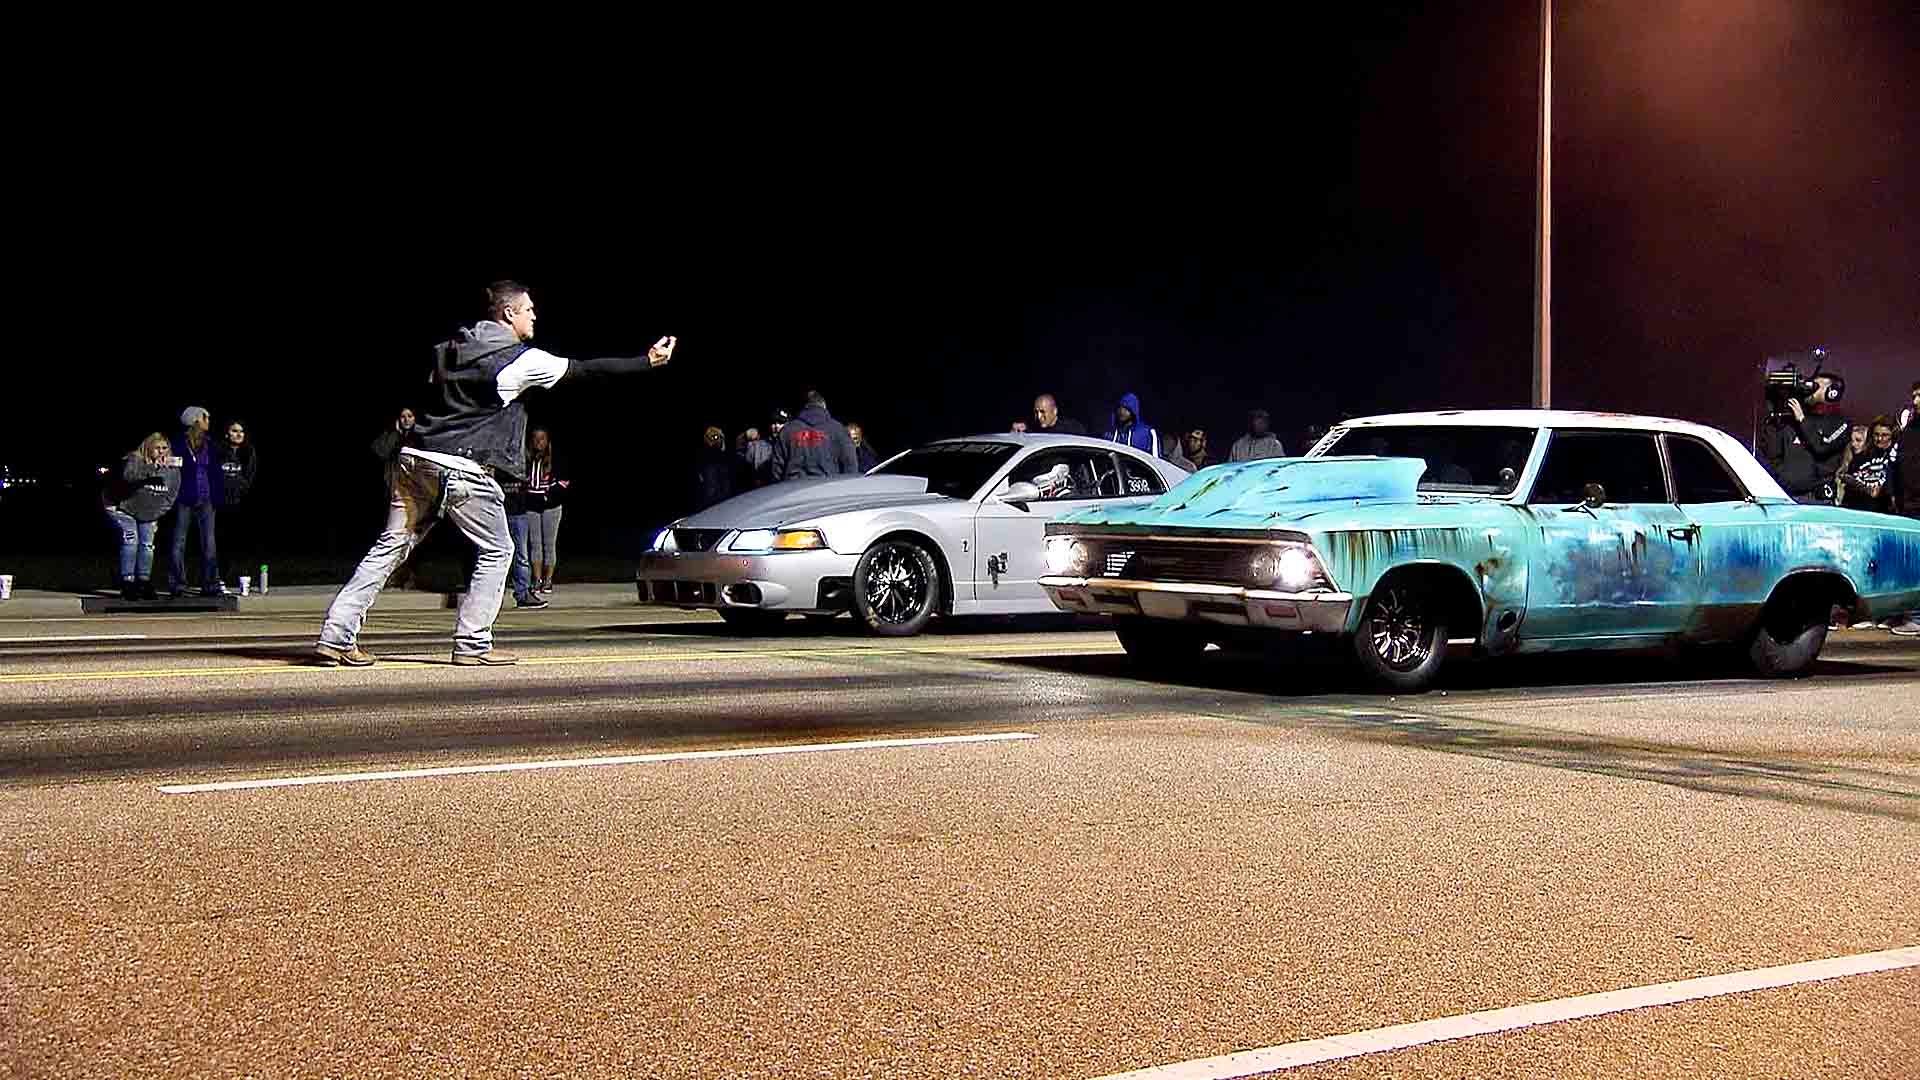 Street Outlaws: Memphis Show - Full Episodes on Demand - MotorTrend